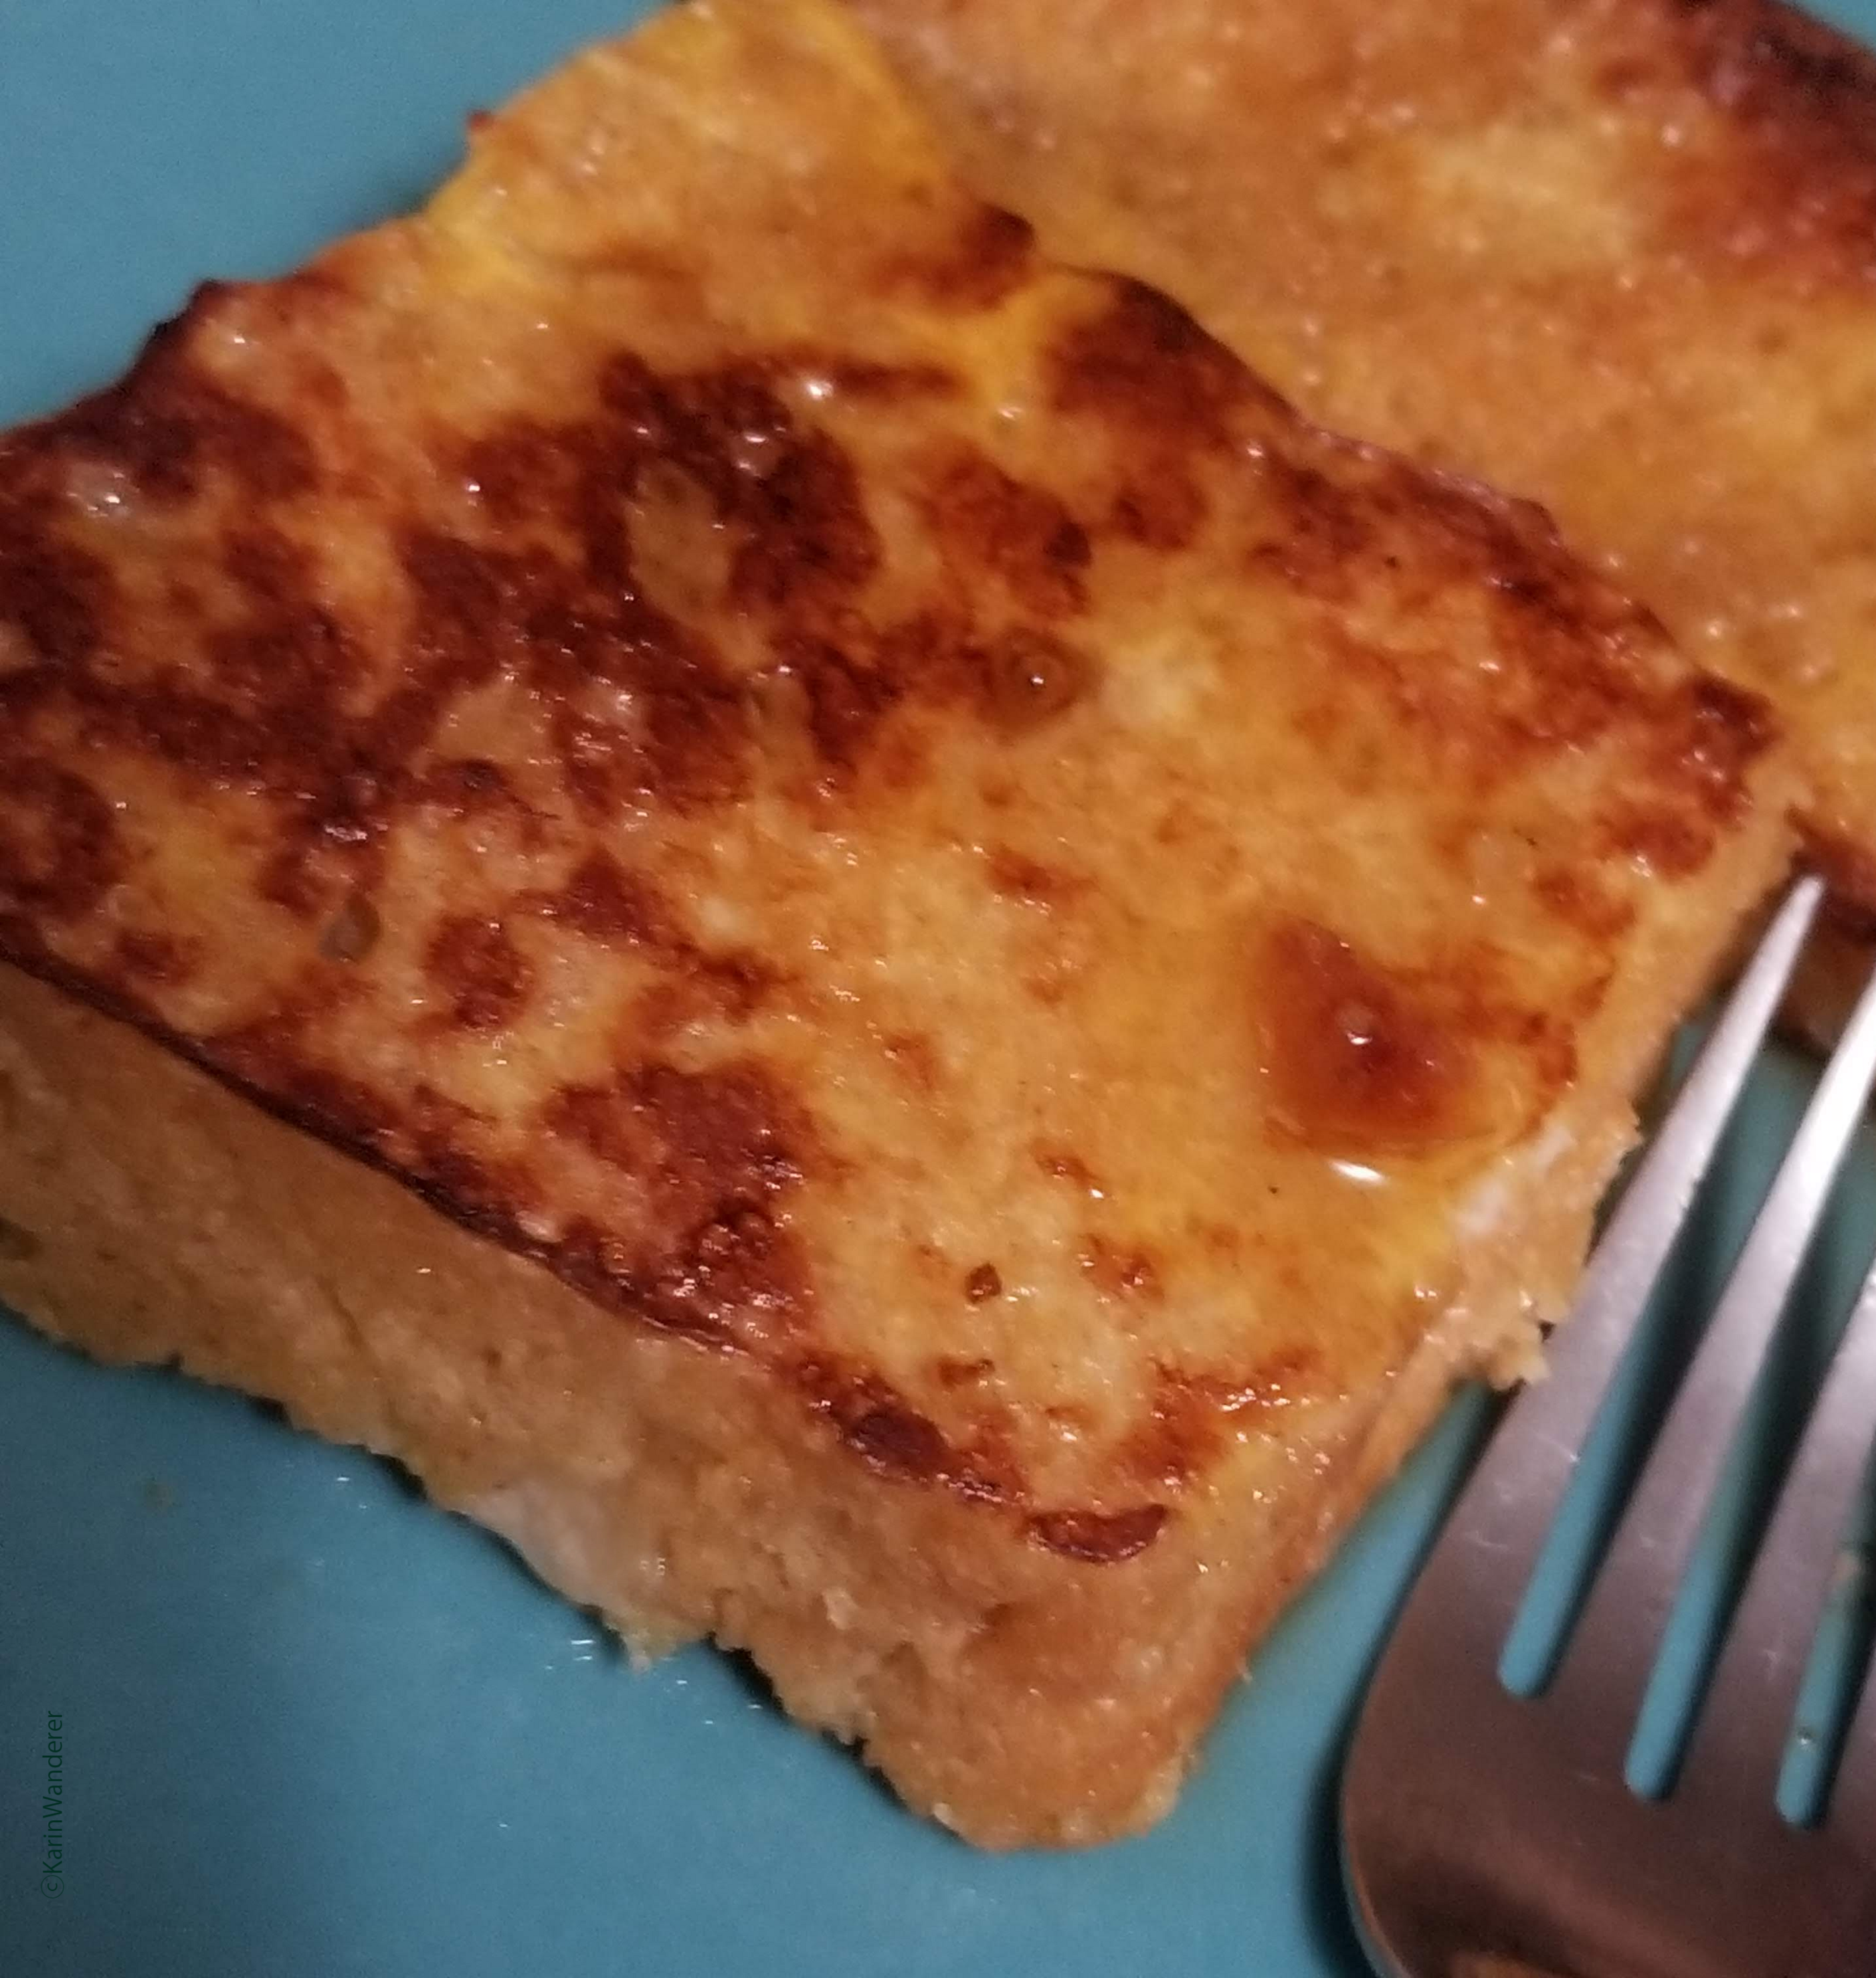 A slice of delicious peanut butter bread french toast with maple syrup.